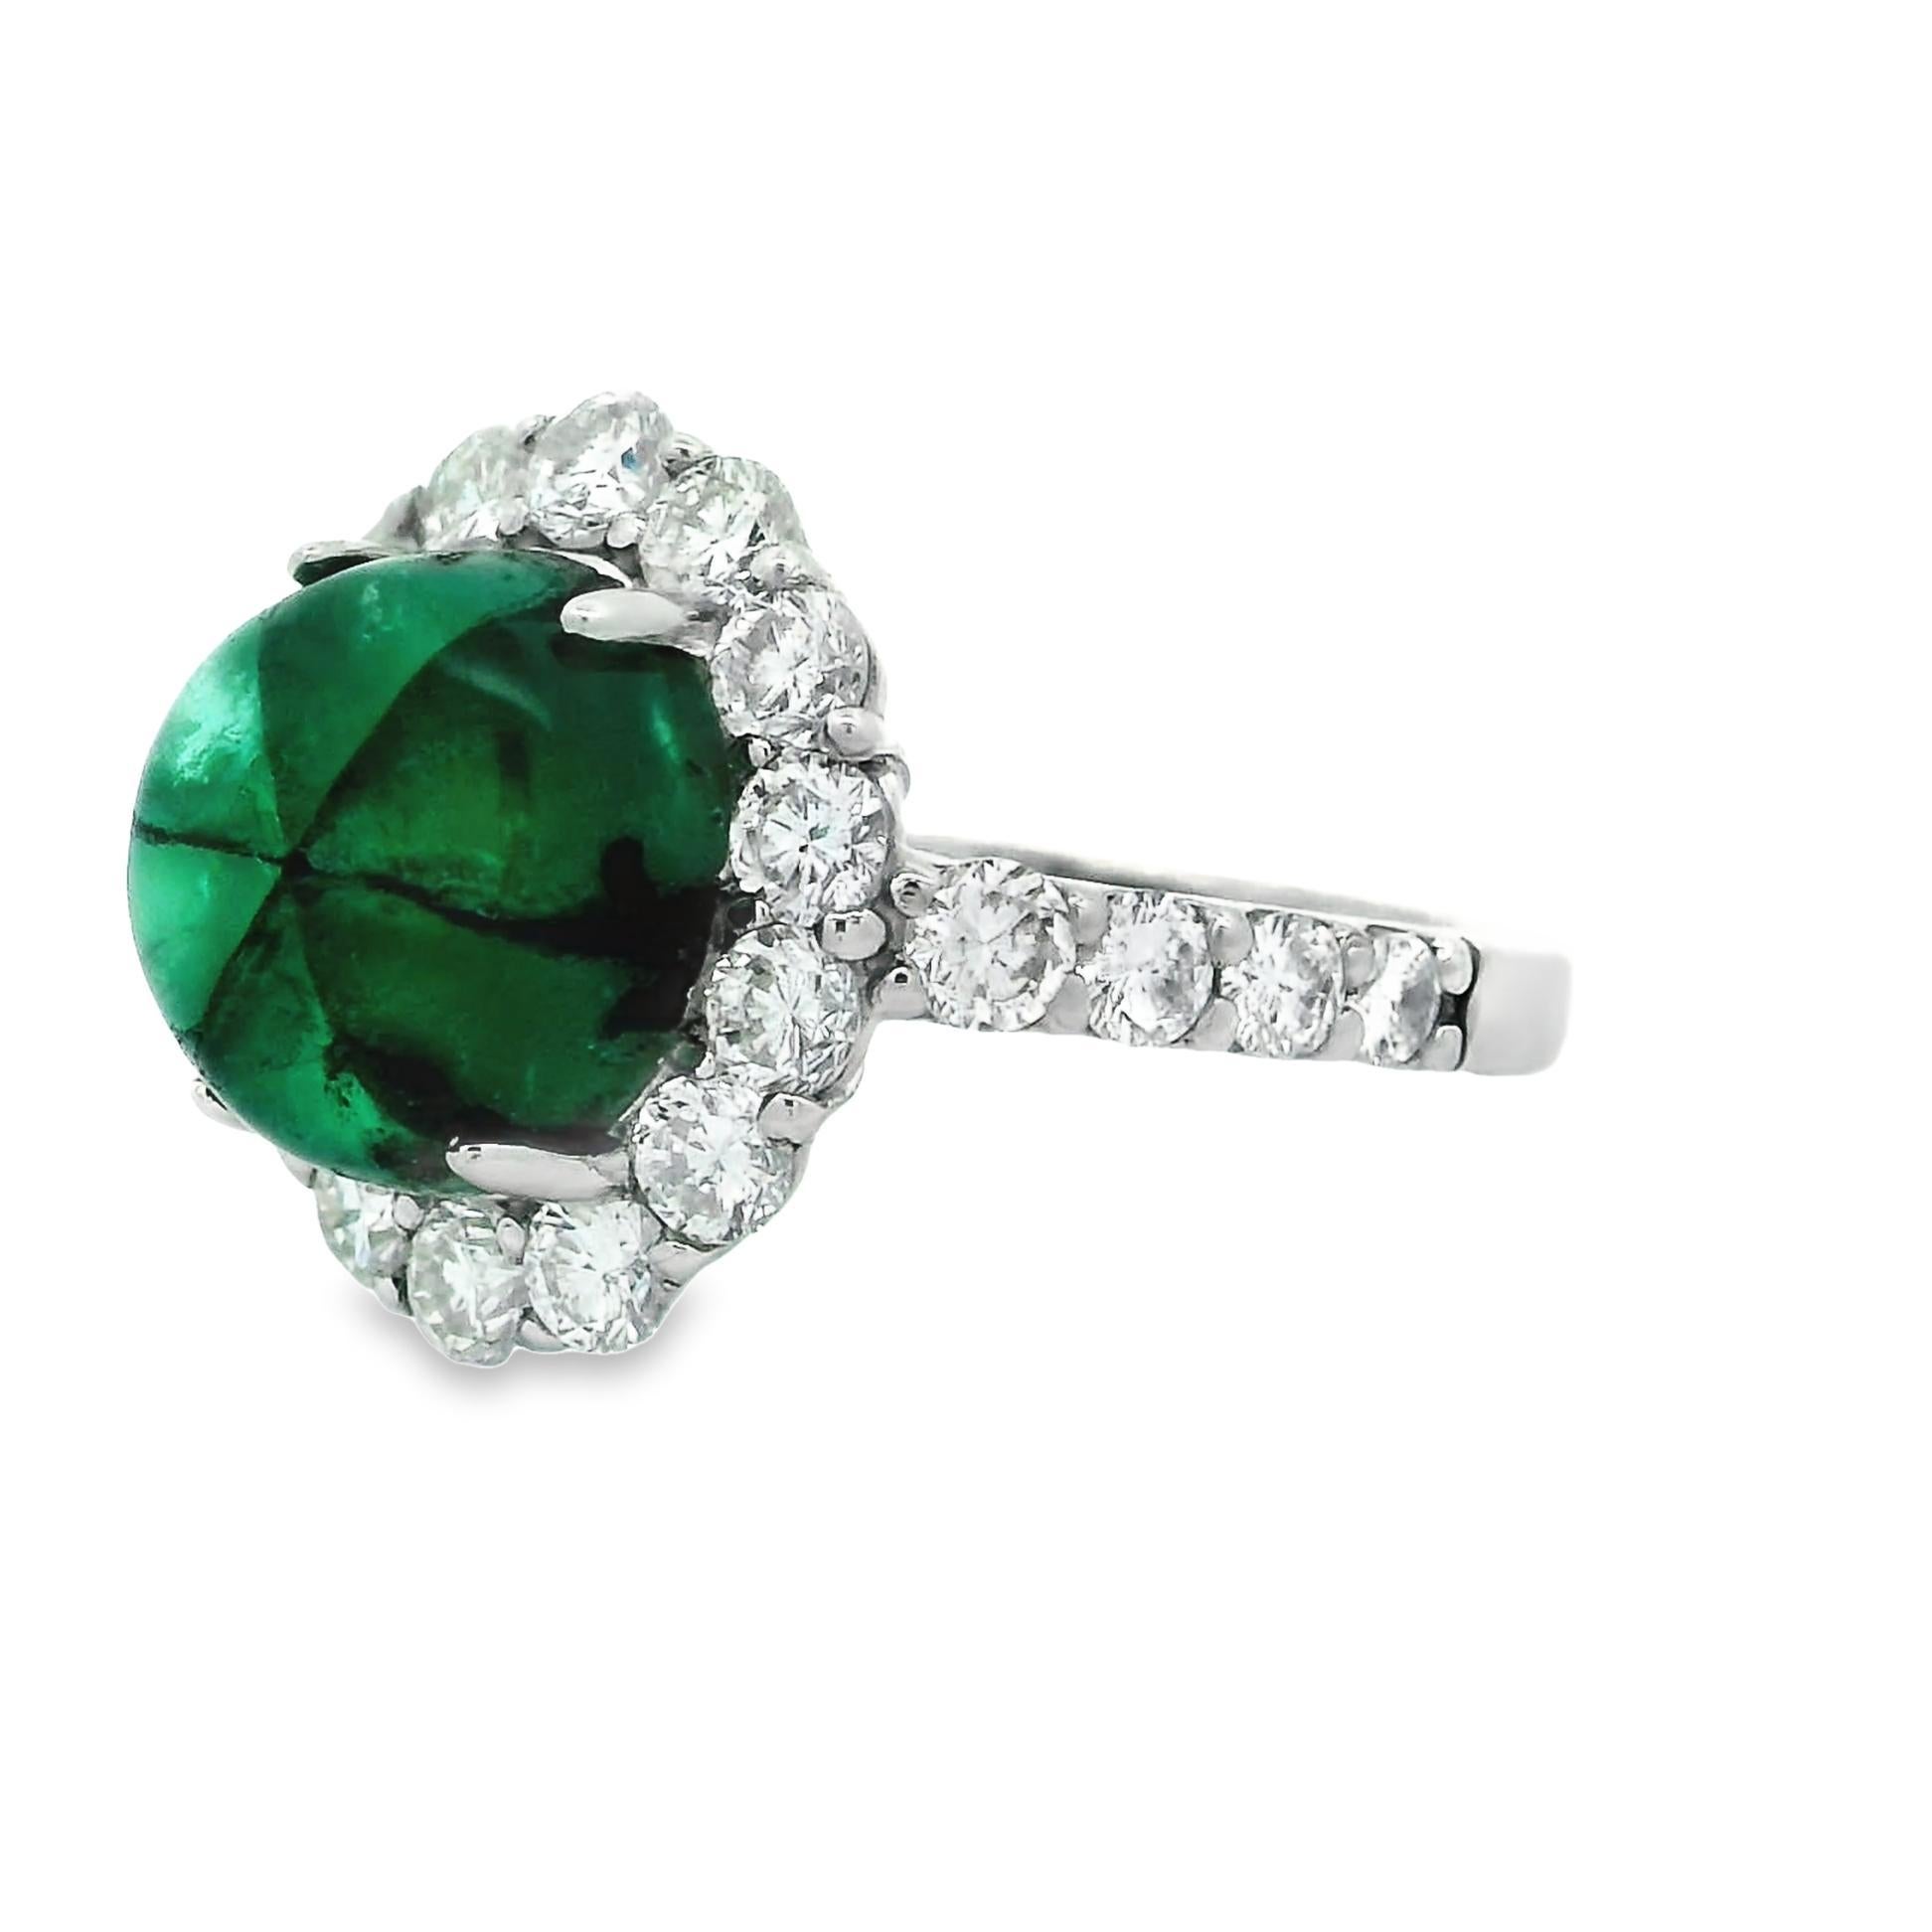 A rare and unique 3.59 carat of Trapiche Emerald takes center stage! It is a rare variety of Emerald characterized by a six-arm radial pattern of usually black spokes separating areas of green emerald. Most Trapiche emeralds come from the emerald